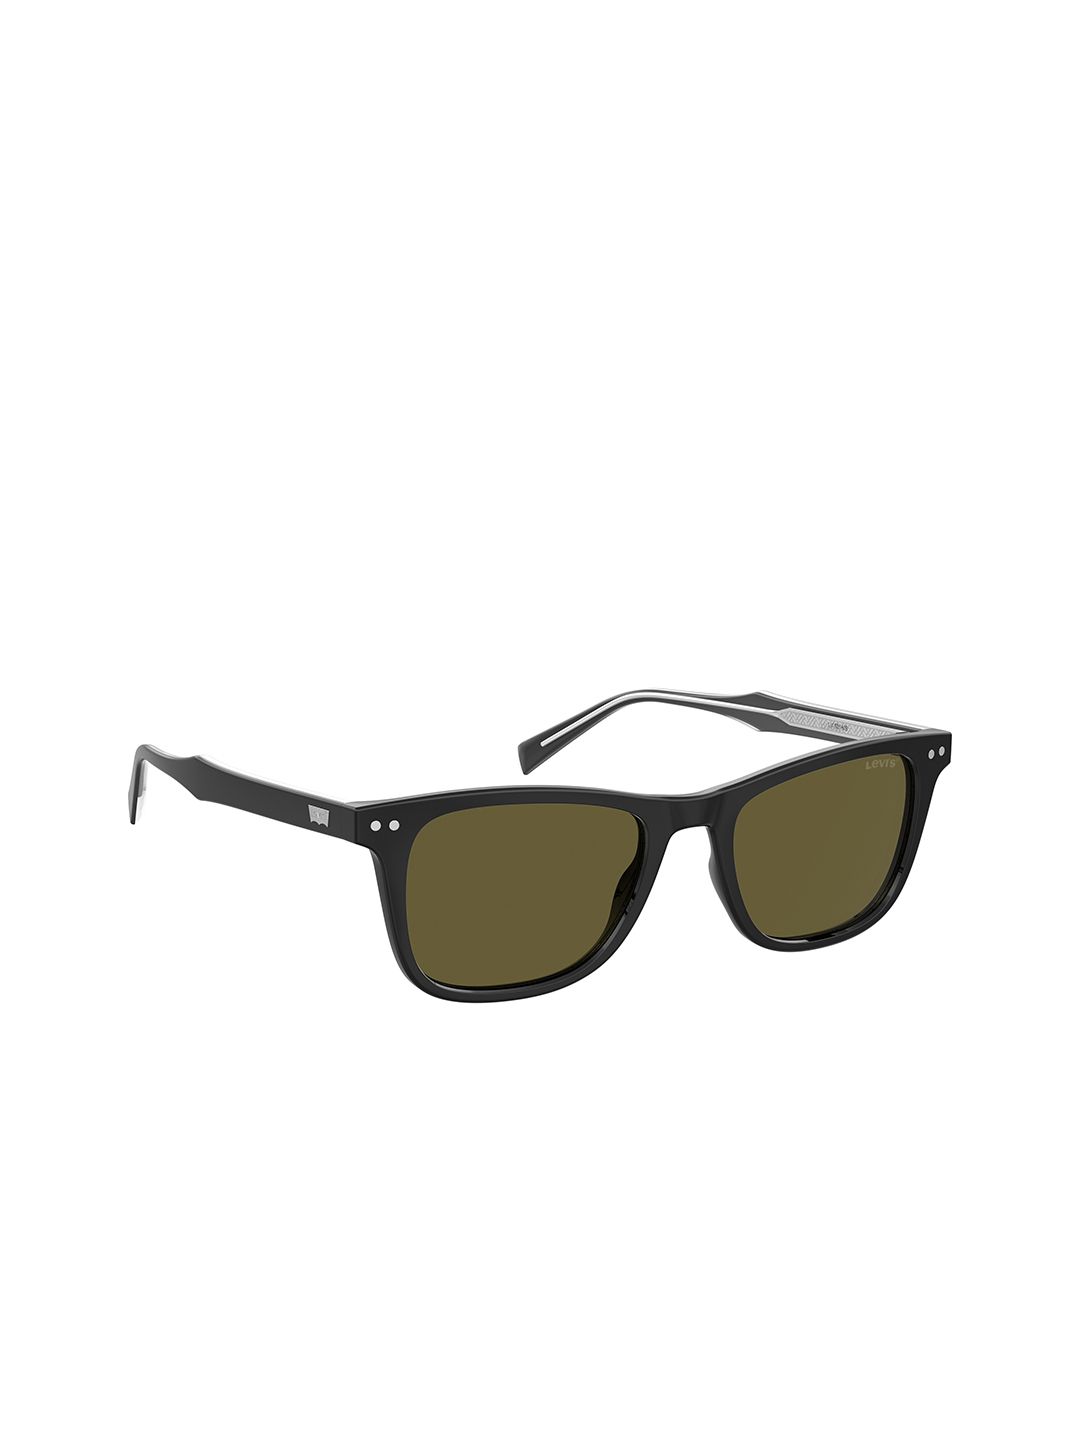 Levis Unisex Green Lens & Black Square Sunglasses with UV Protected Lens Price in India